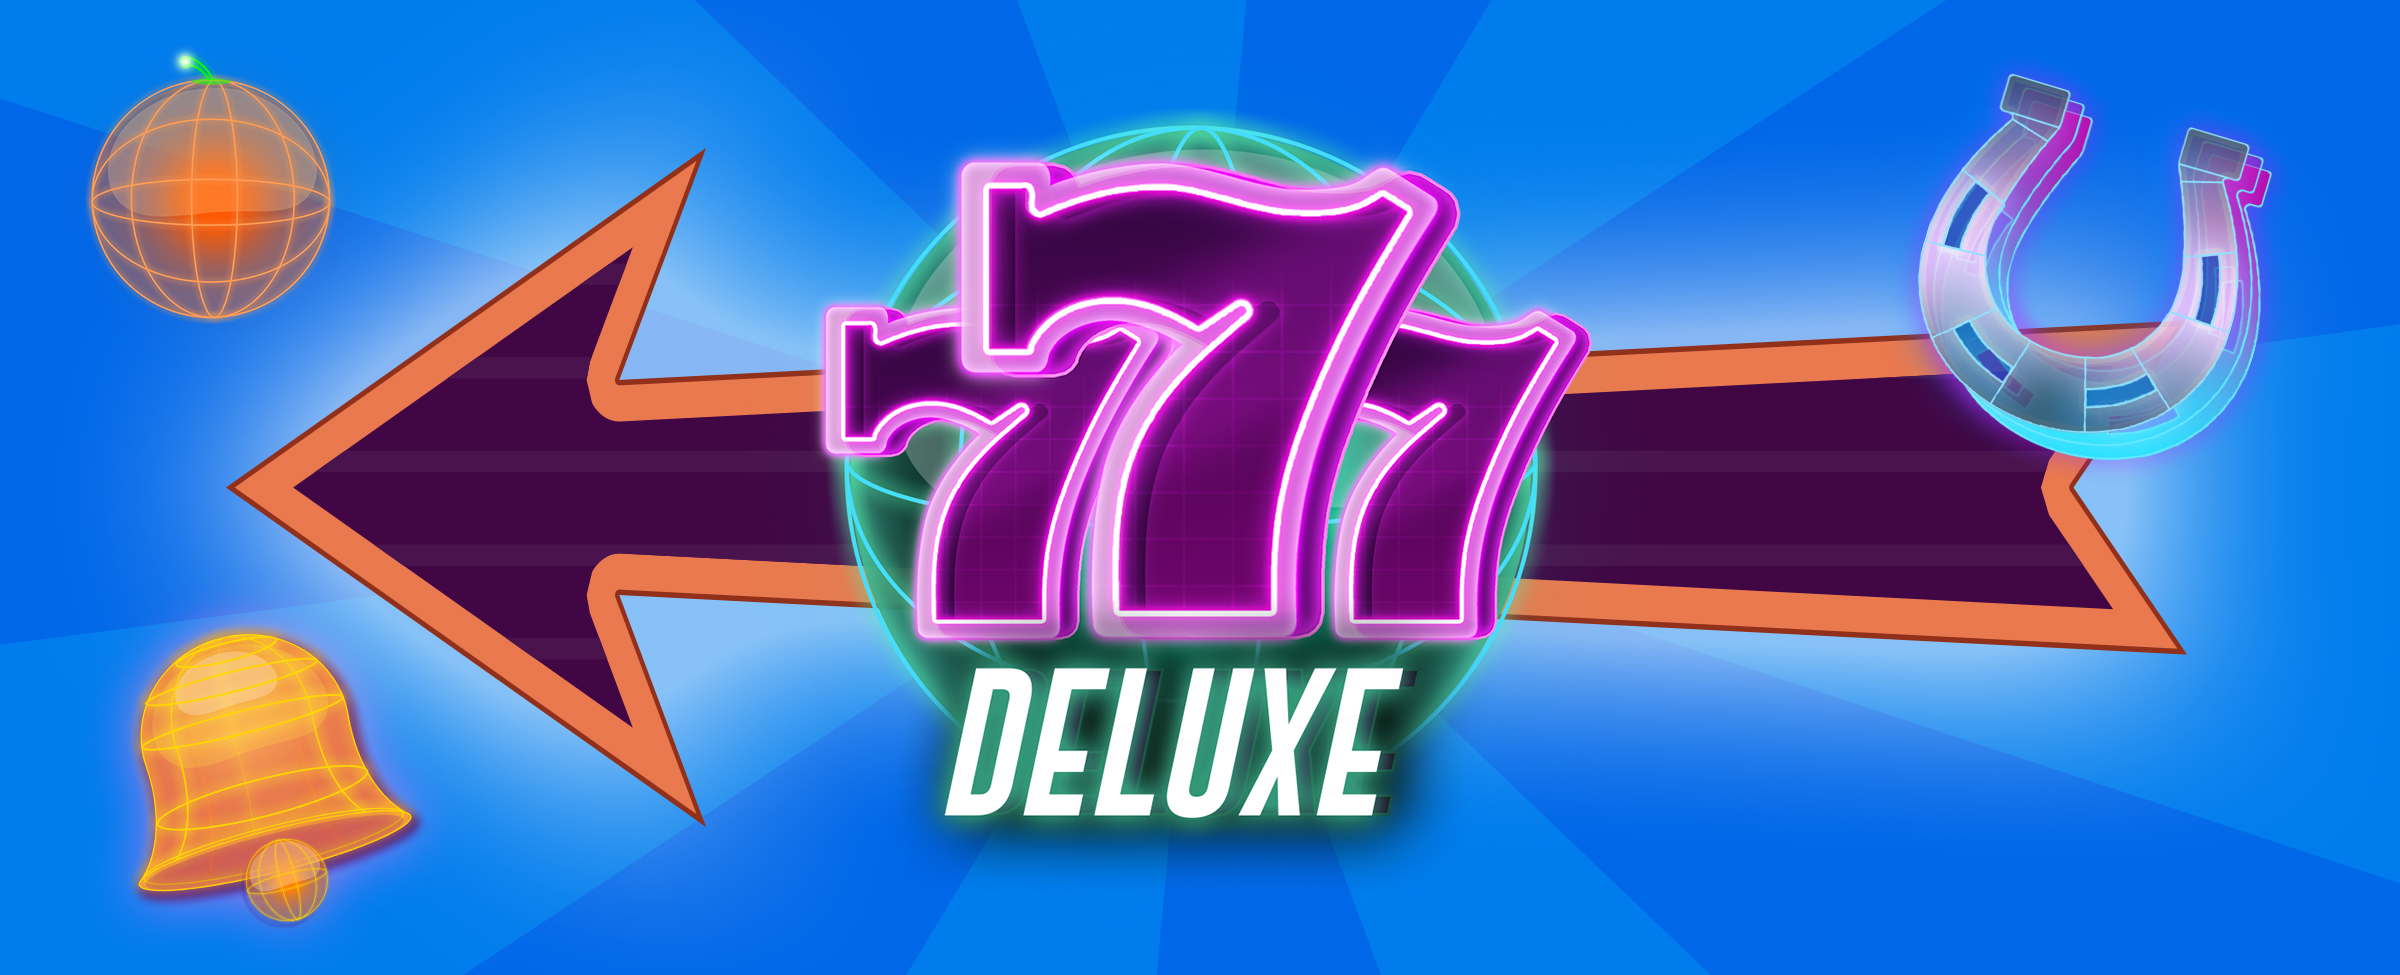 A blue background is overlaid by a purple arrow pointing to the left with a thick orange border. In front, we see the main logo from the Cafe Casino slots game, 777 Deluxe, showcasing a green-glowing globe, and three number sevens huddled together, glowing in neon purple. Below, the word “deluxe” is seen in bold, white capital letters. Surrounding the image are three icons from the game, including a silver horseshoe, a globe, and a gold bell.